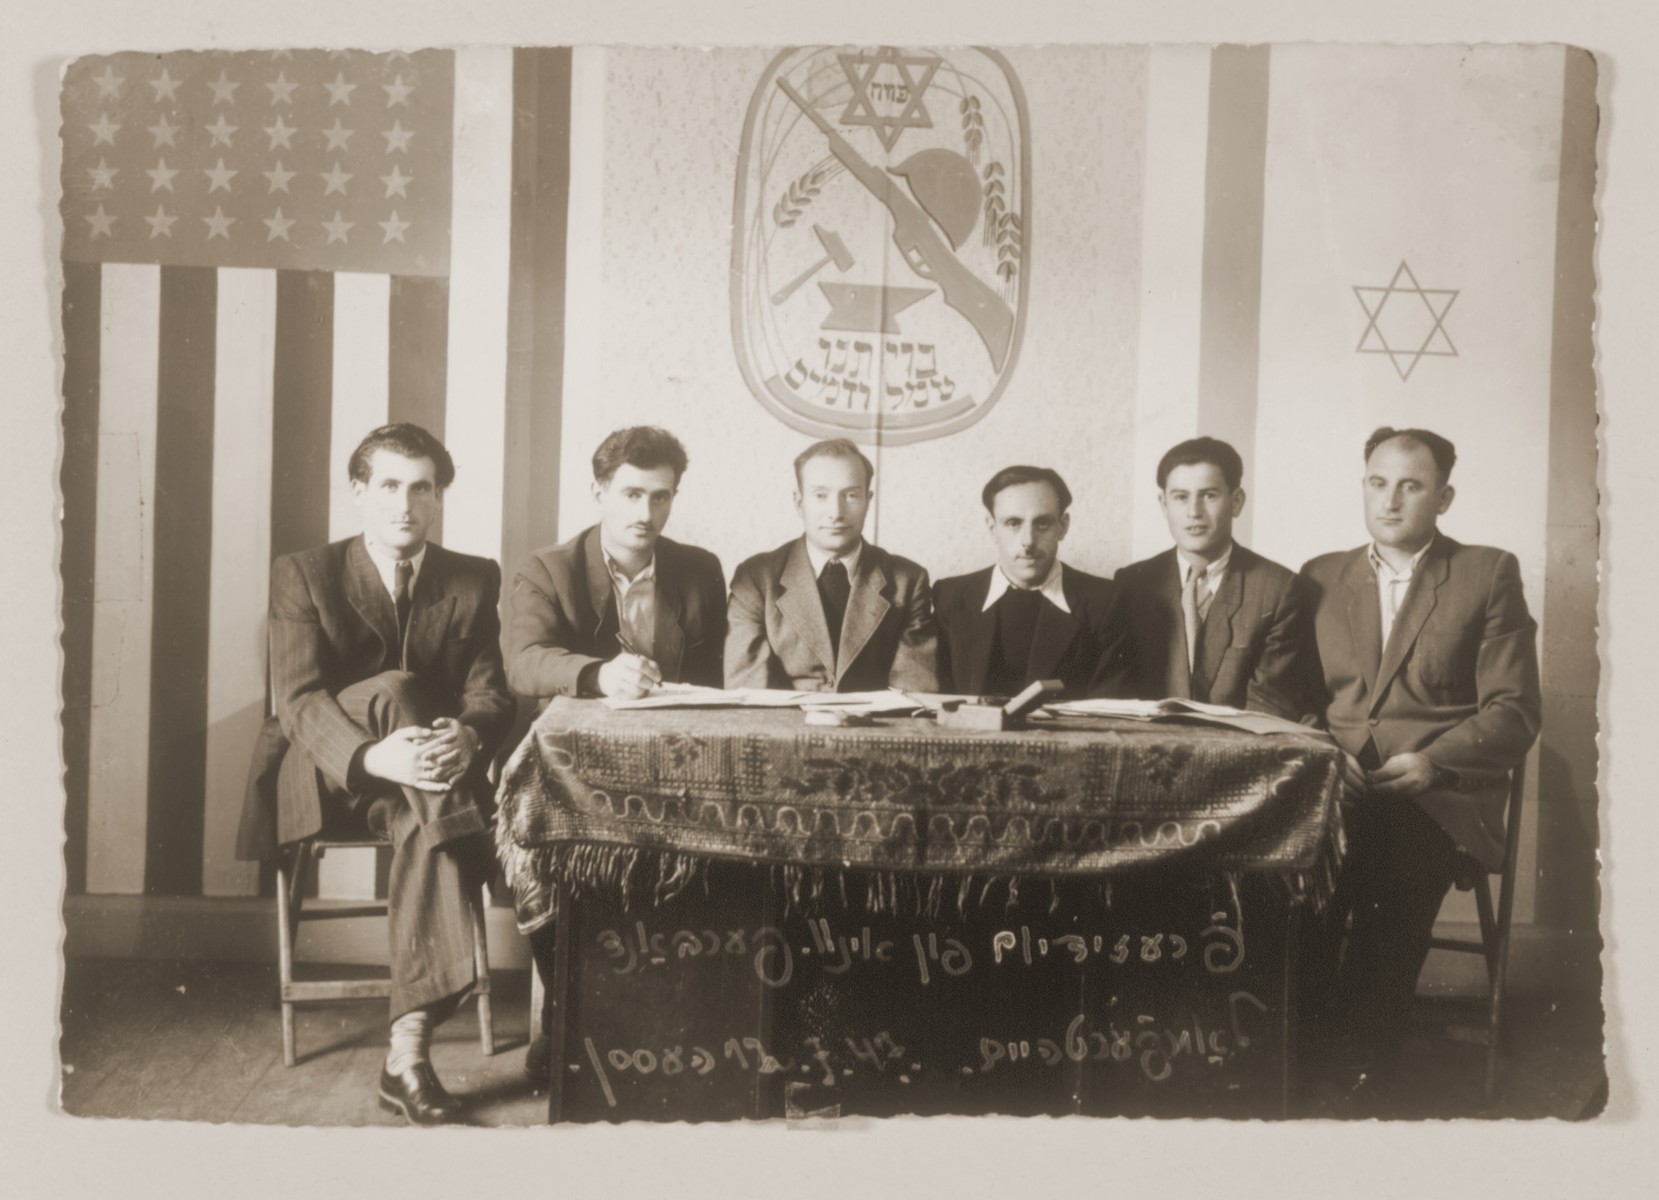 Meeting of the six-member presidium of an association in the Lampertheim displaced persons camp.  

The shield above the table bears the motto, "Our covenant, toil and blood."